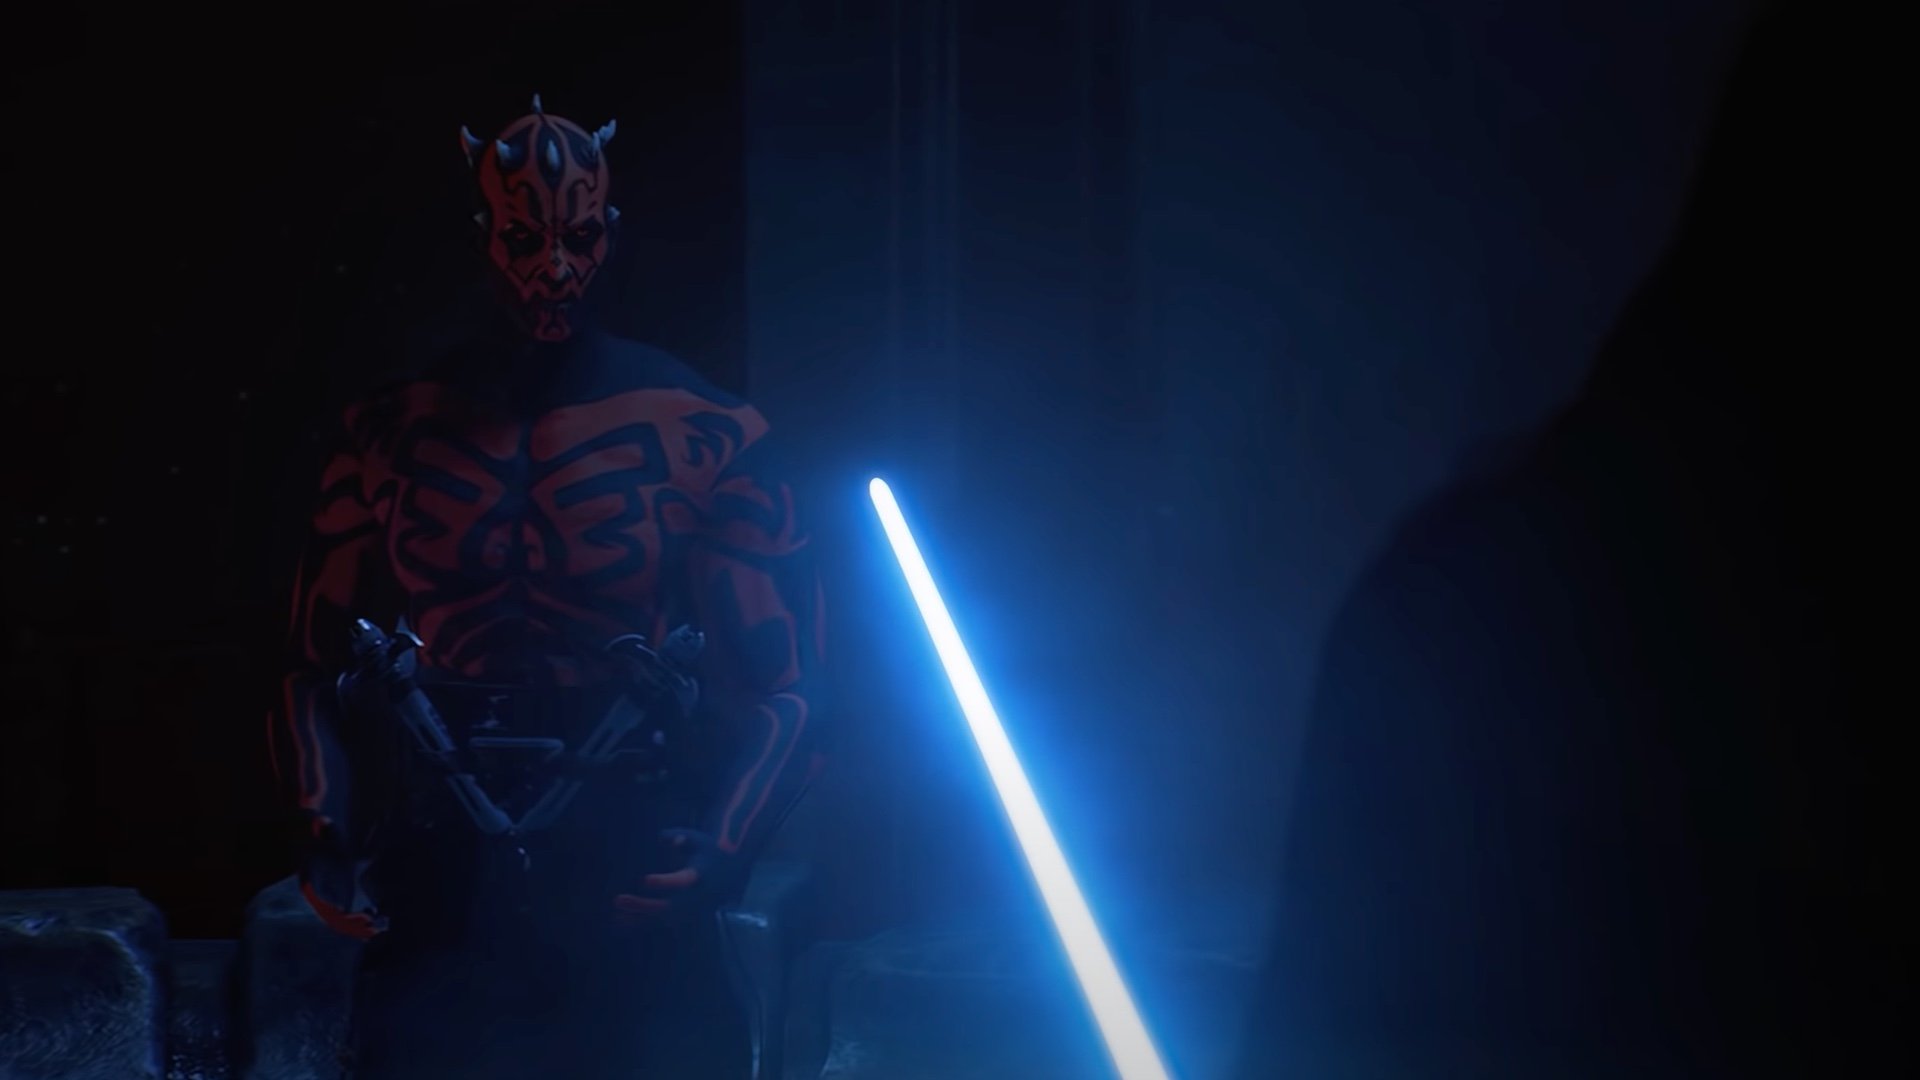 Fan Made For The Obi Wan Kenobi Series Set Up His Rematch With Darth Maul